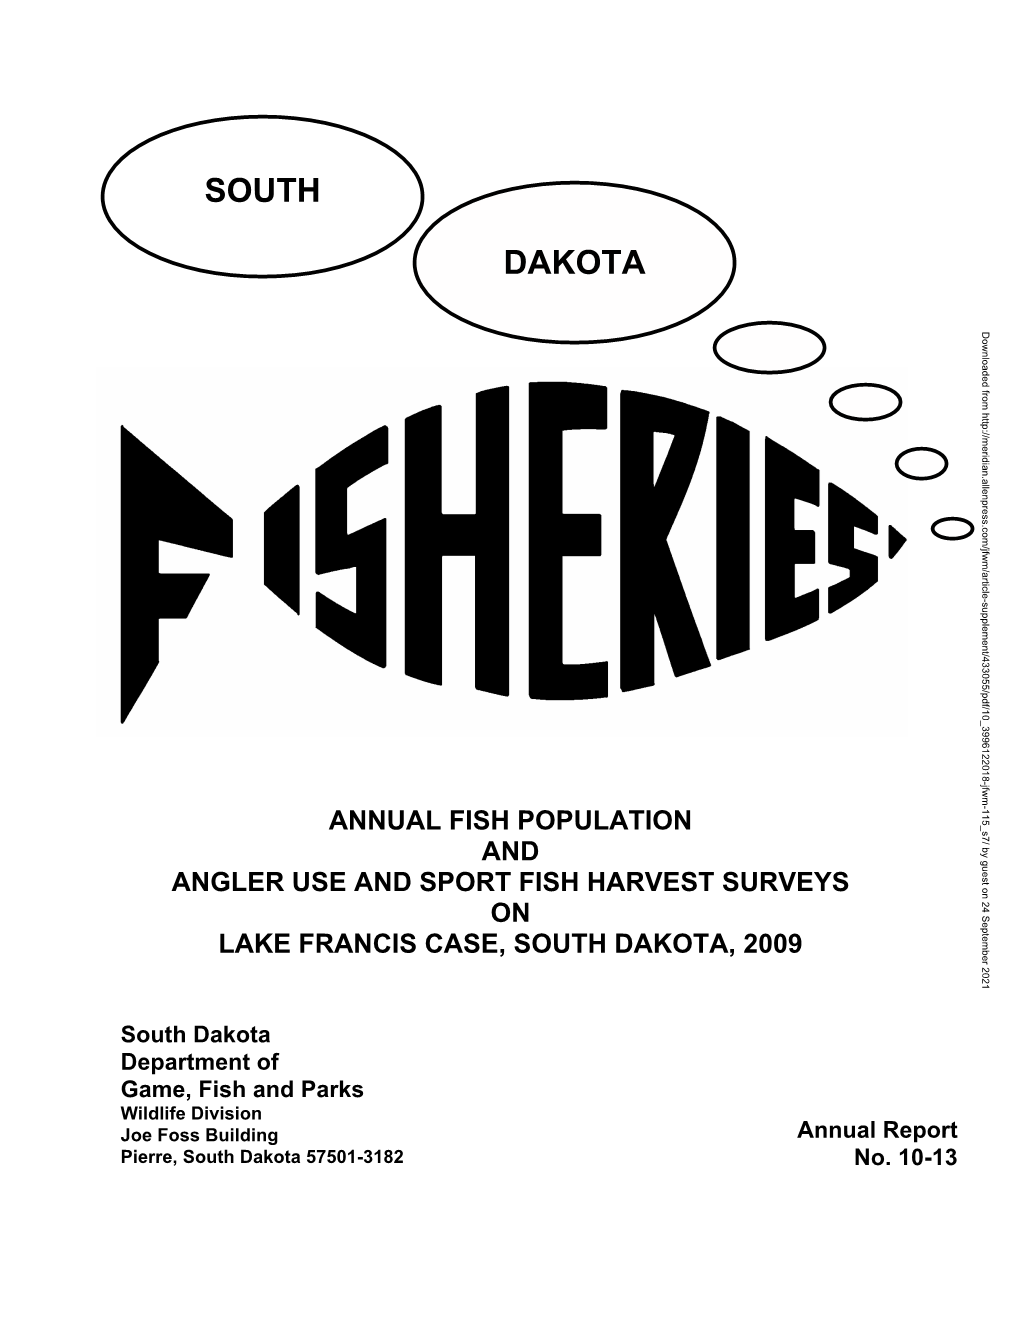 Annual Fish Population and Angler Use and Sport Fish Harvest Surveys on Lake Francis Case, South Dakota, 2009